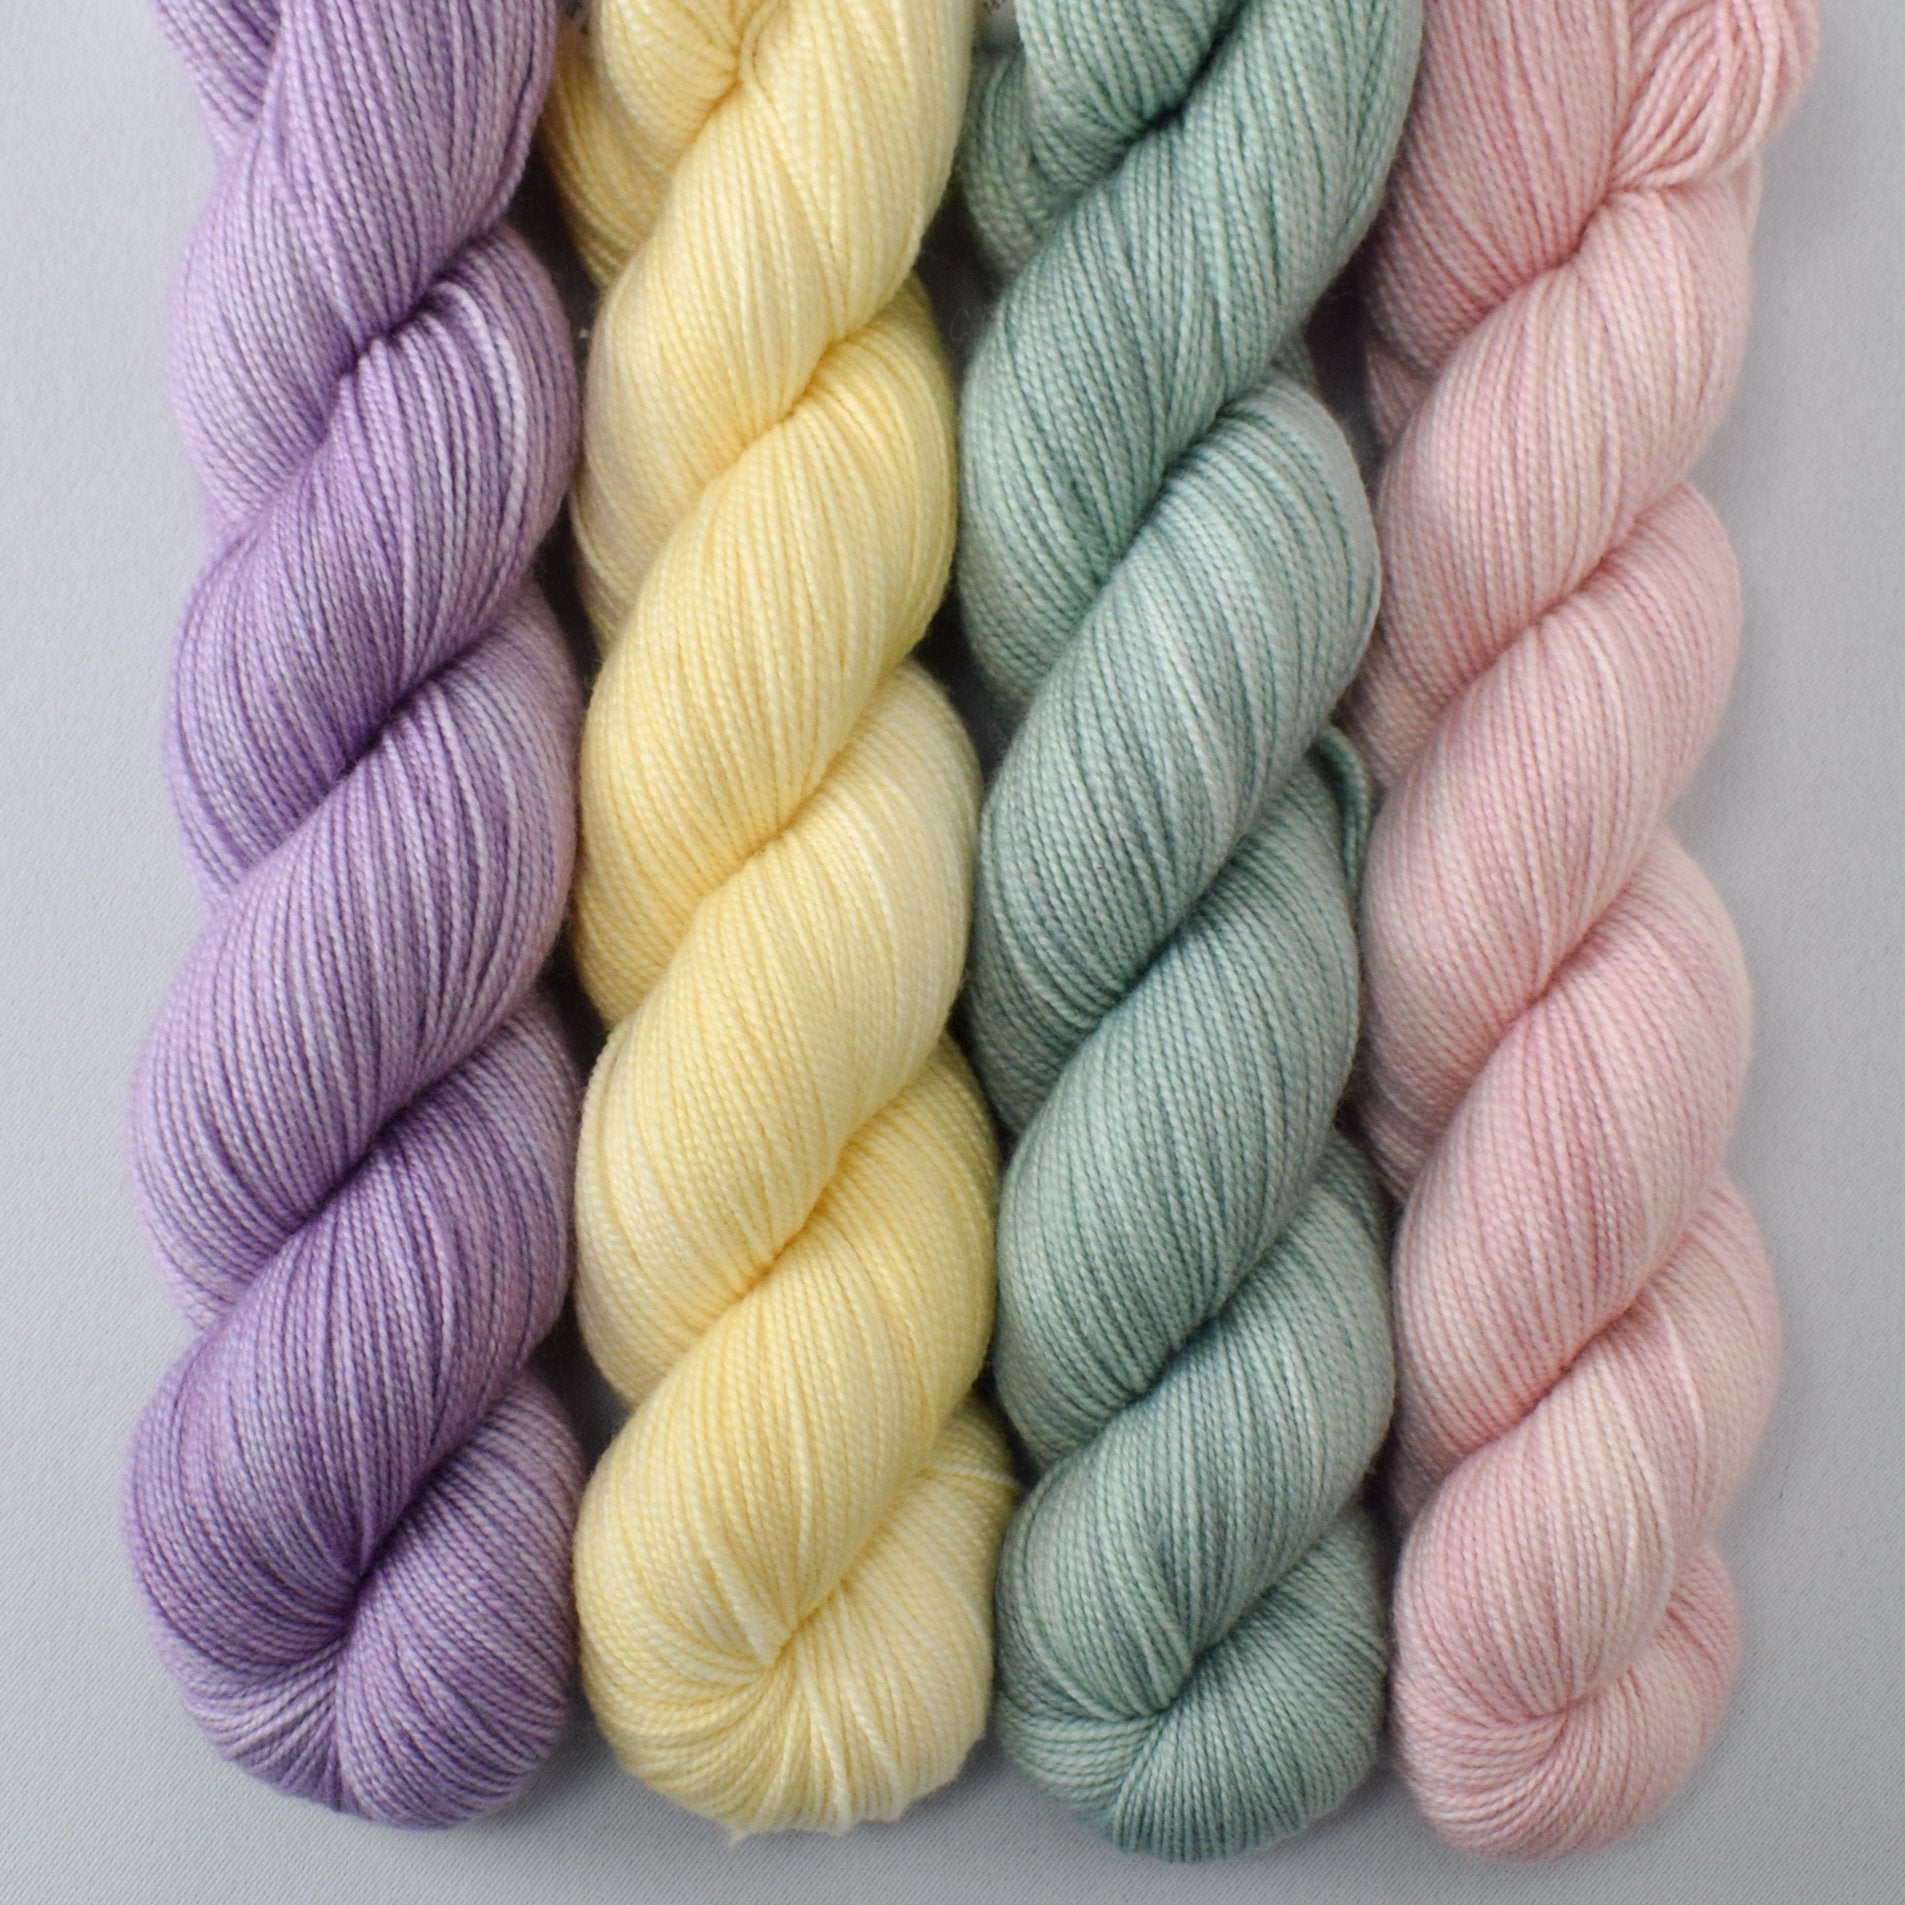 Jonquil, Palm Valley, Sugar, Theluj - Miss Babs Yummy 2-Ply Quartet